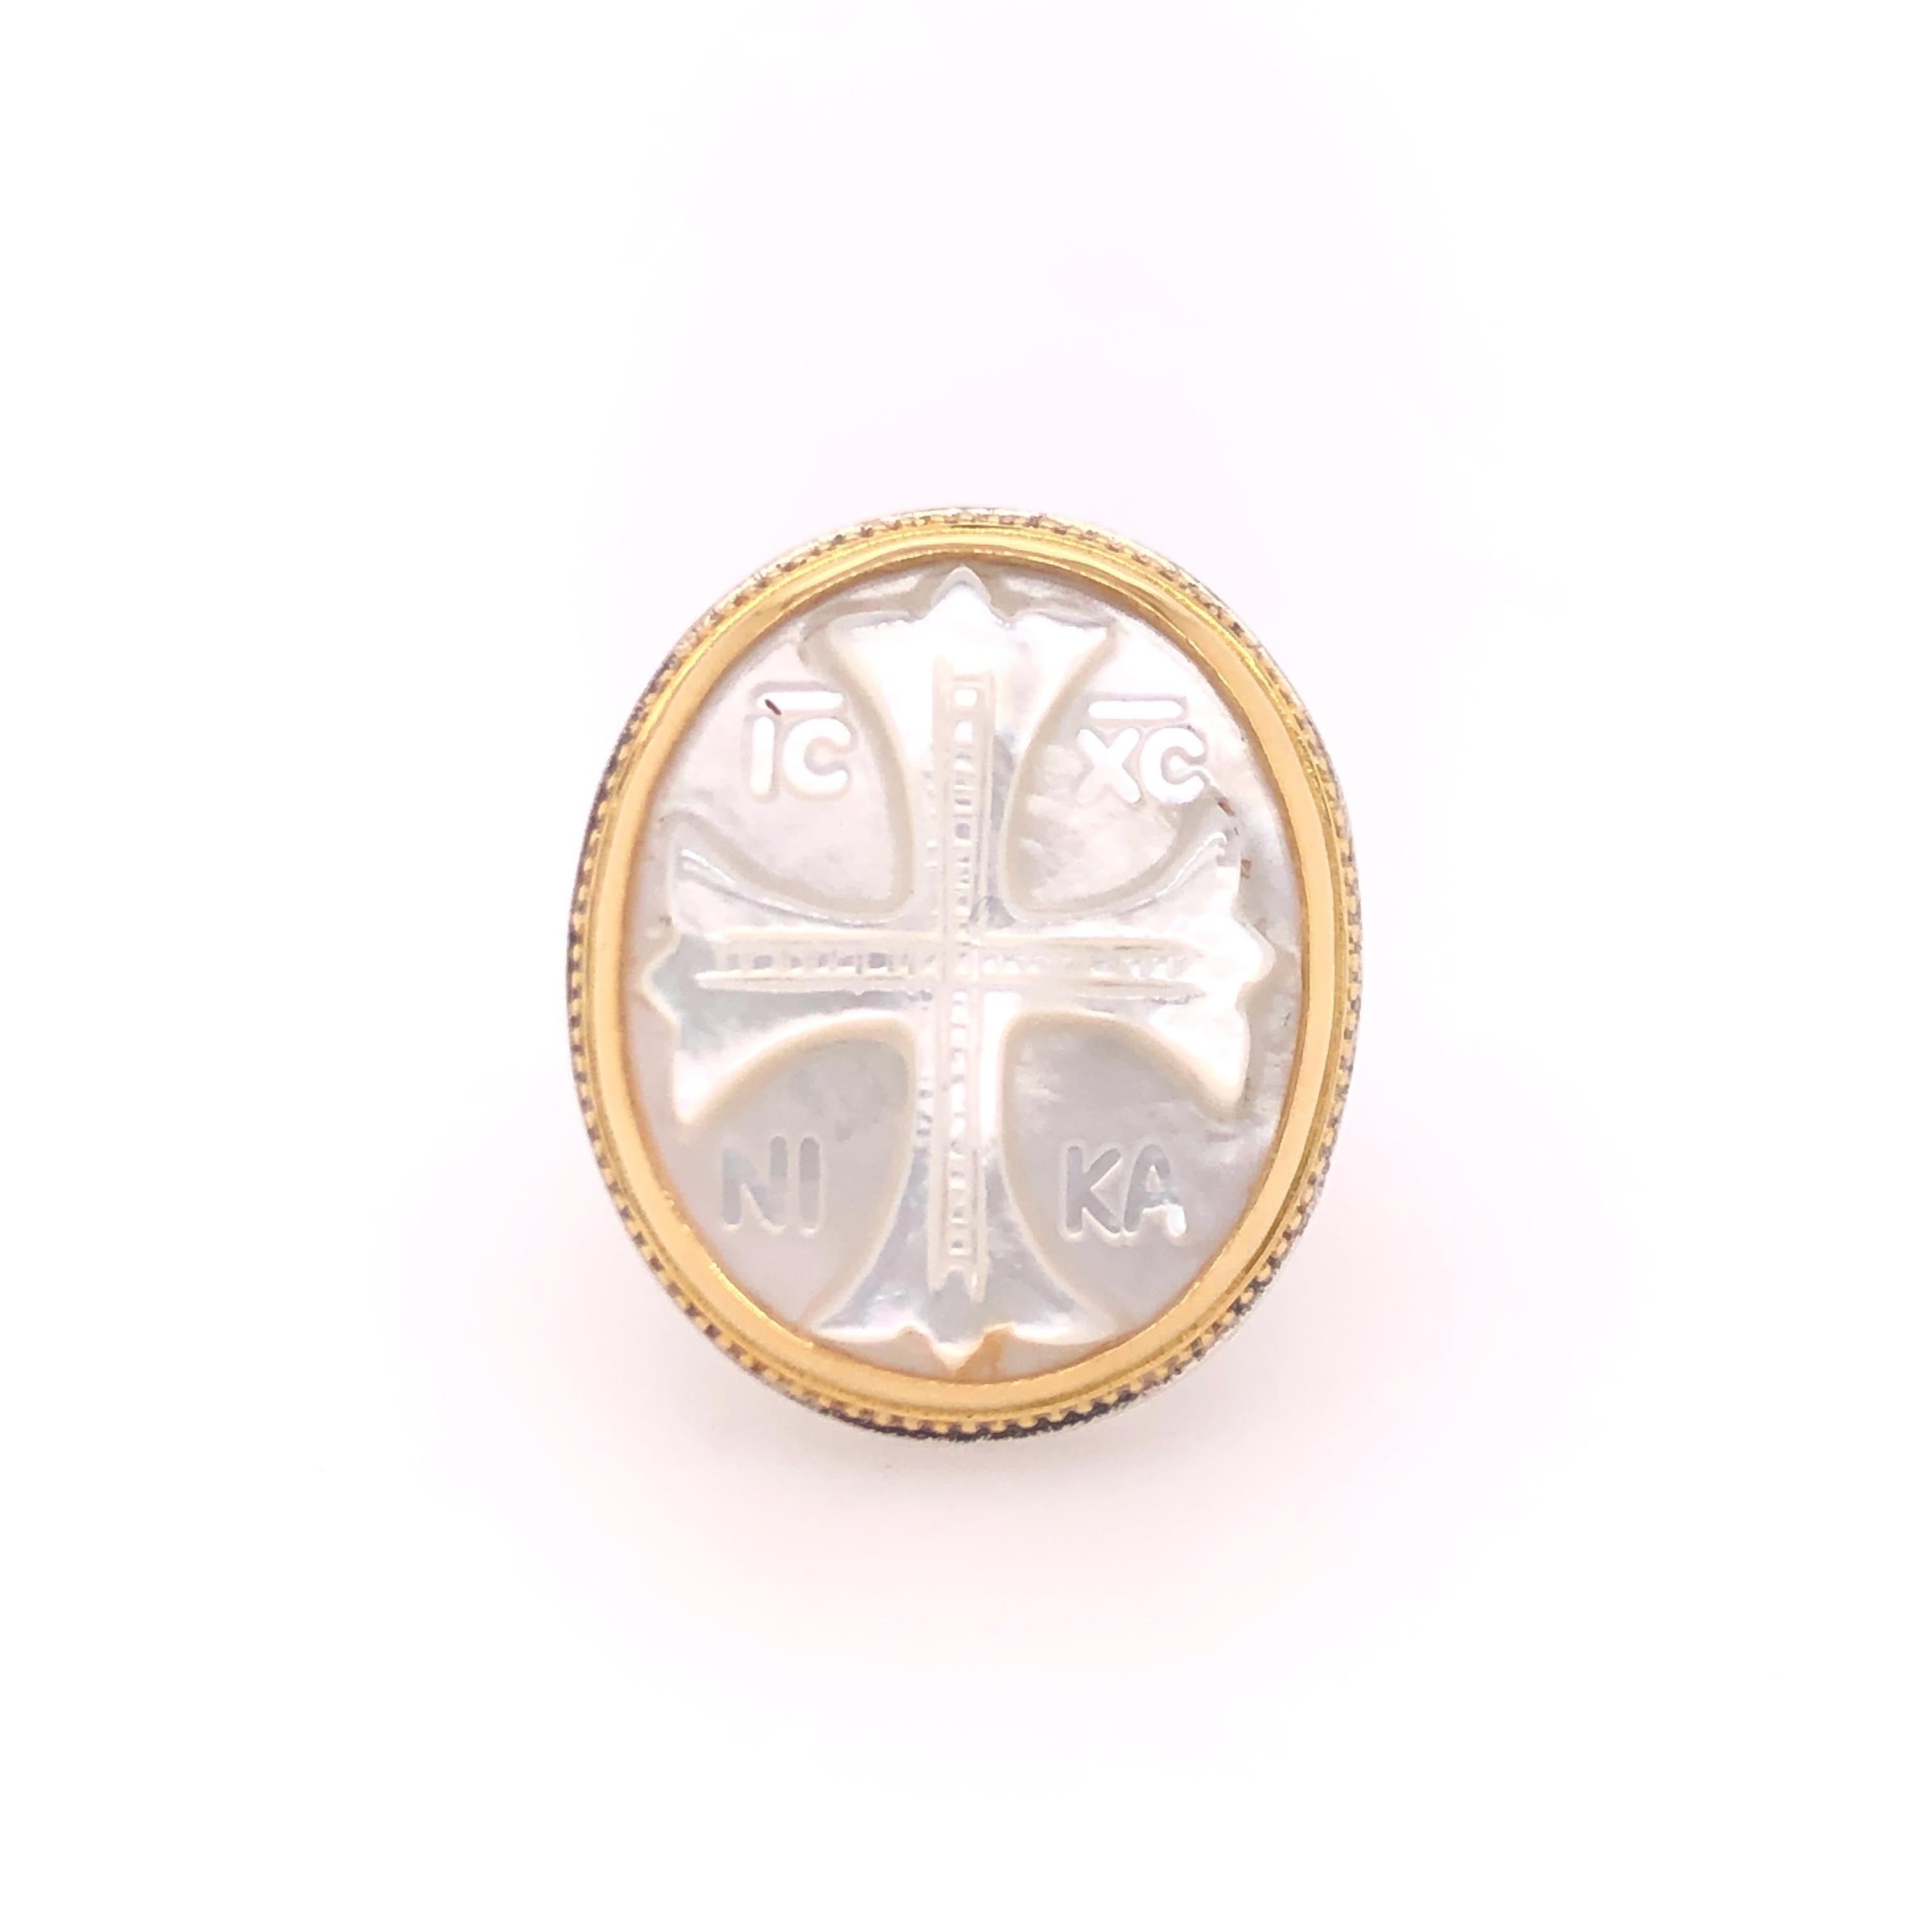 Gemstone: Mother of Pearl
Material: Sterling Silver & 18k Gold

Size: 7

Stamped: 750, 925, KONSTANTINO